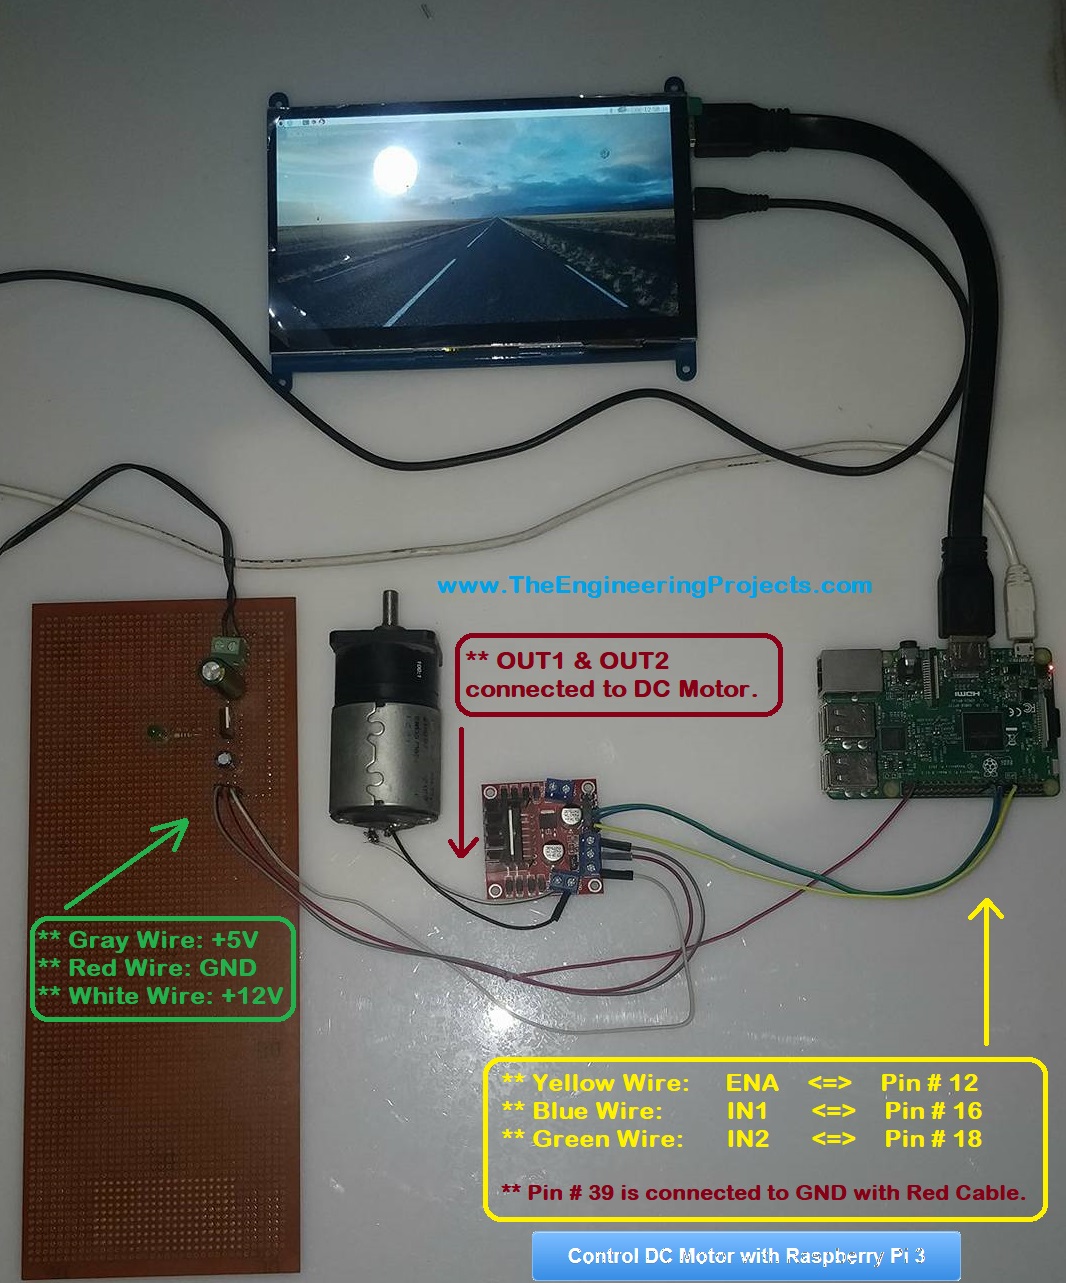 How to Control DC Motor with Raspberry Pi 3, dc motor with pi 3, pi 3 dc motor, dc motor control pi 3, dc motor with pi 3, dc motor with raspberry pi 3